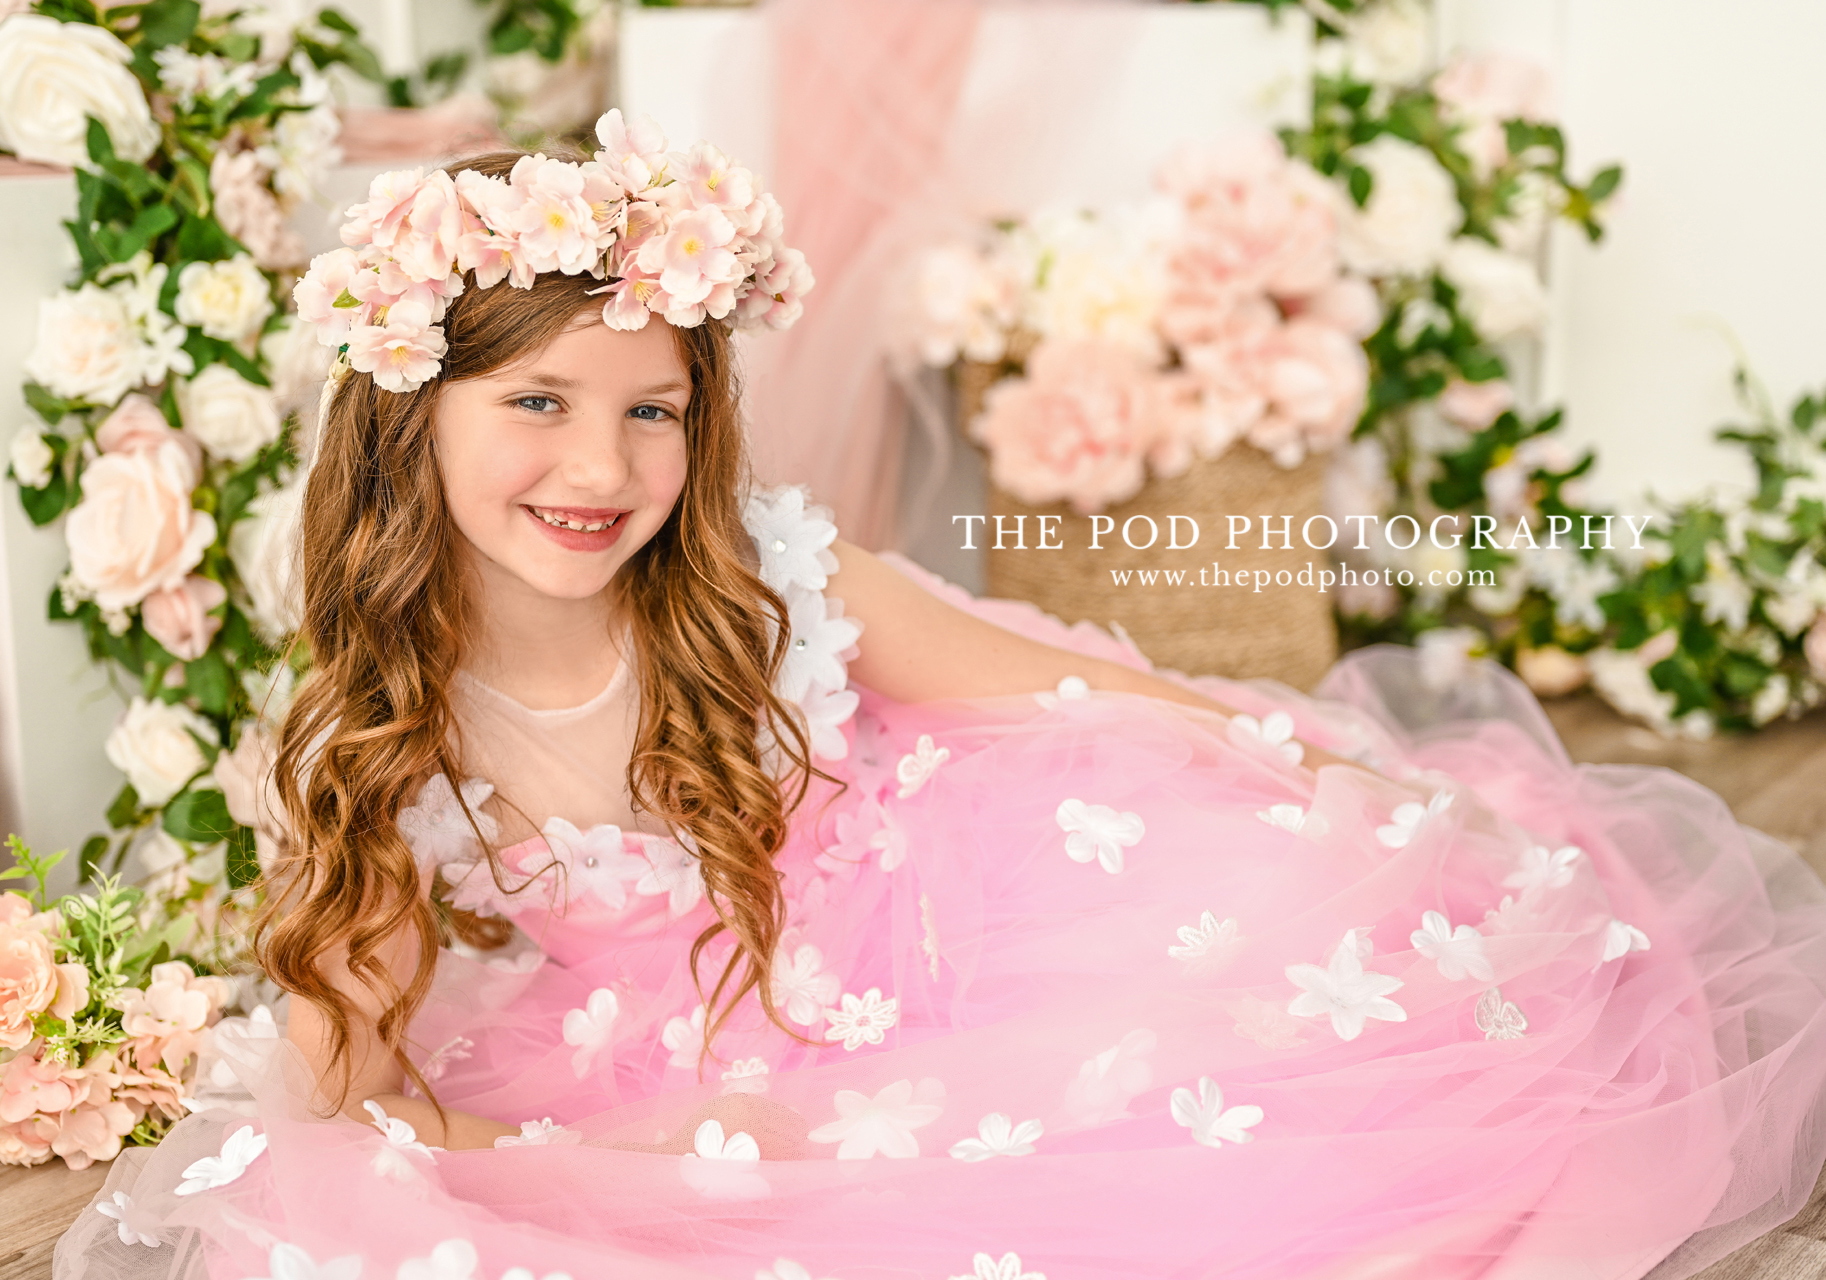 Kids and Family Personality Mini Portrait Sessions - Los Angeles based ...